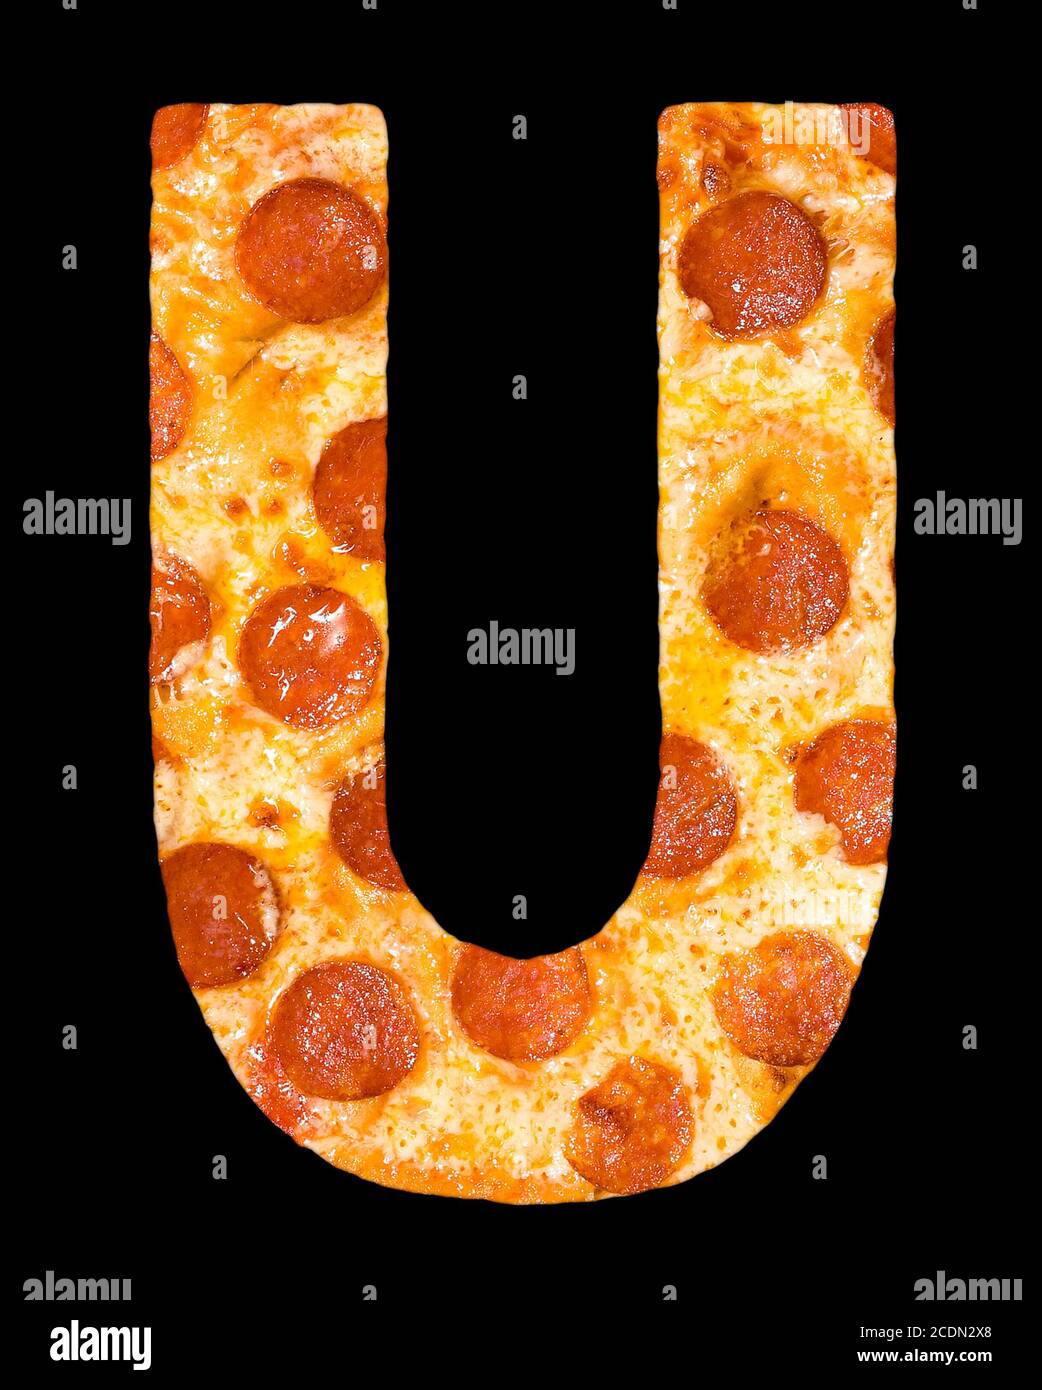 letter U cut out of pizza with peperoni Stock Photo